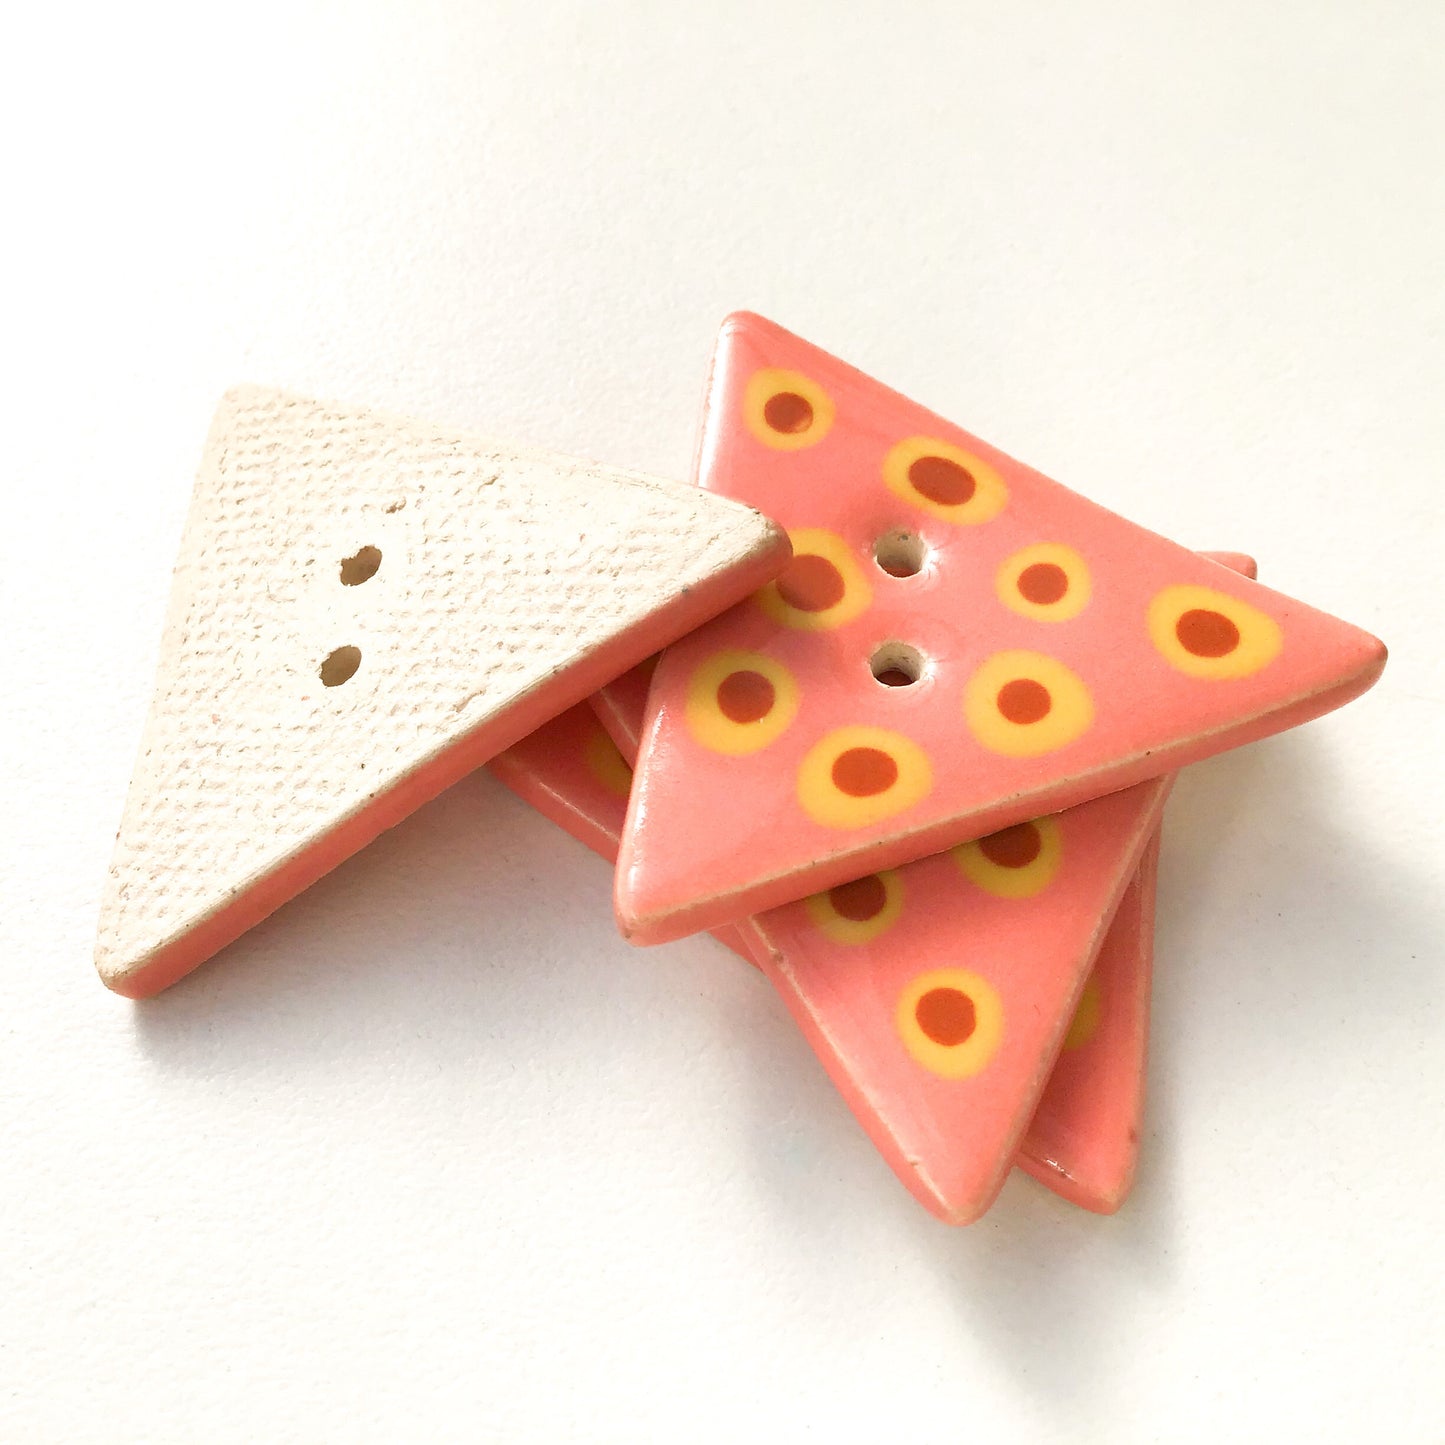 Triangular Polka Dot Buttons - Coral - Brown - Yellow - 1 1/4" x 1 3/8"